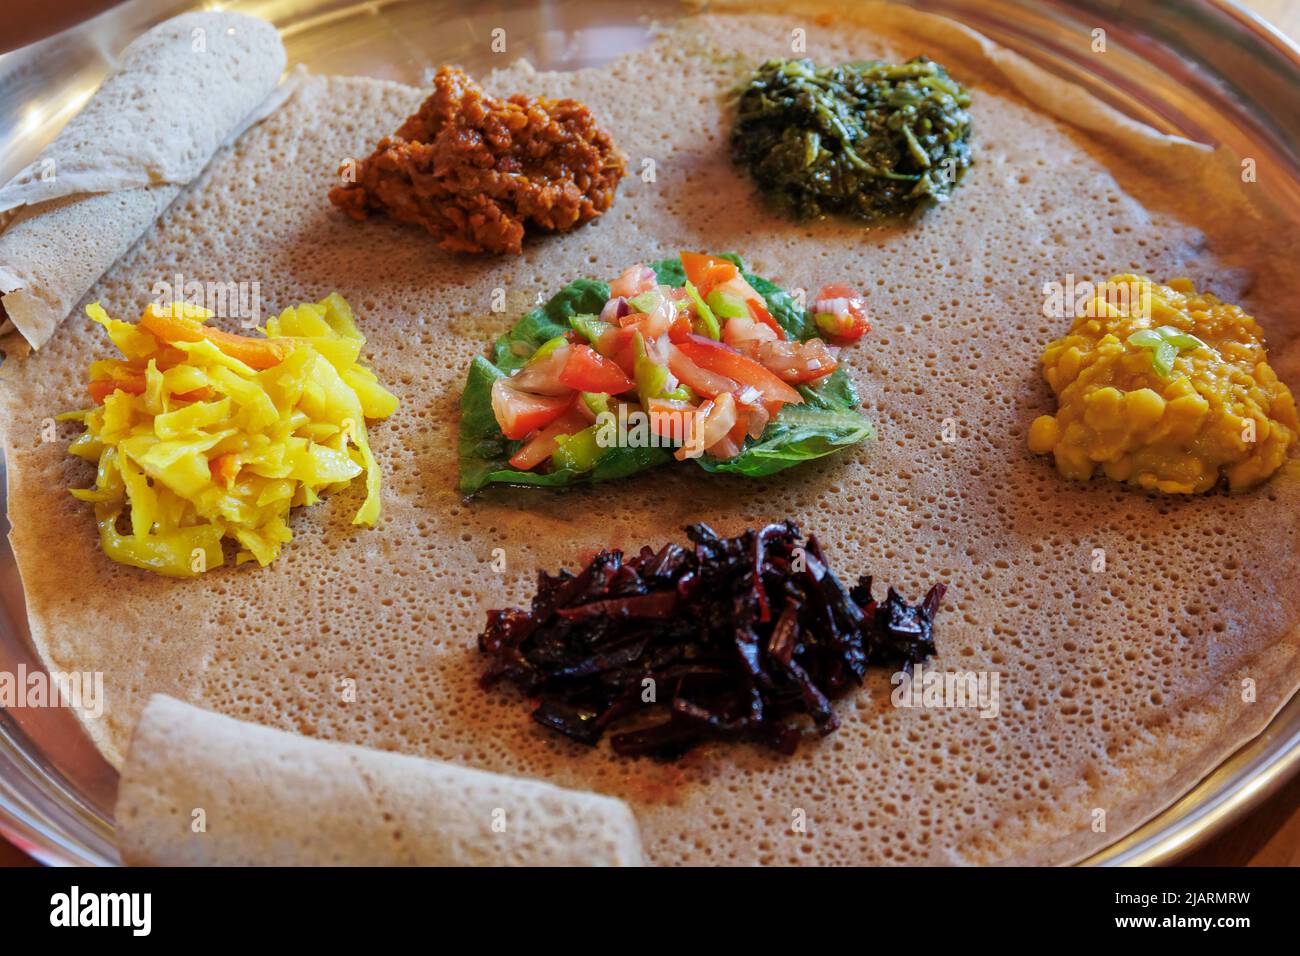 Injera served with vegetables and lentils. Injera, the staple food of Ethiopia, is a sourdough flatbread made from teff flour. Stock Photo